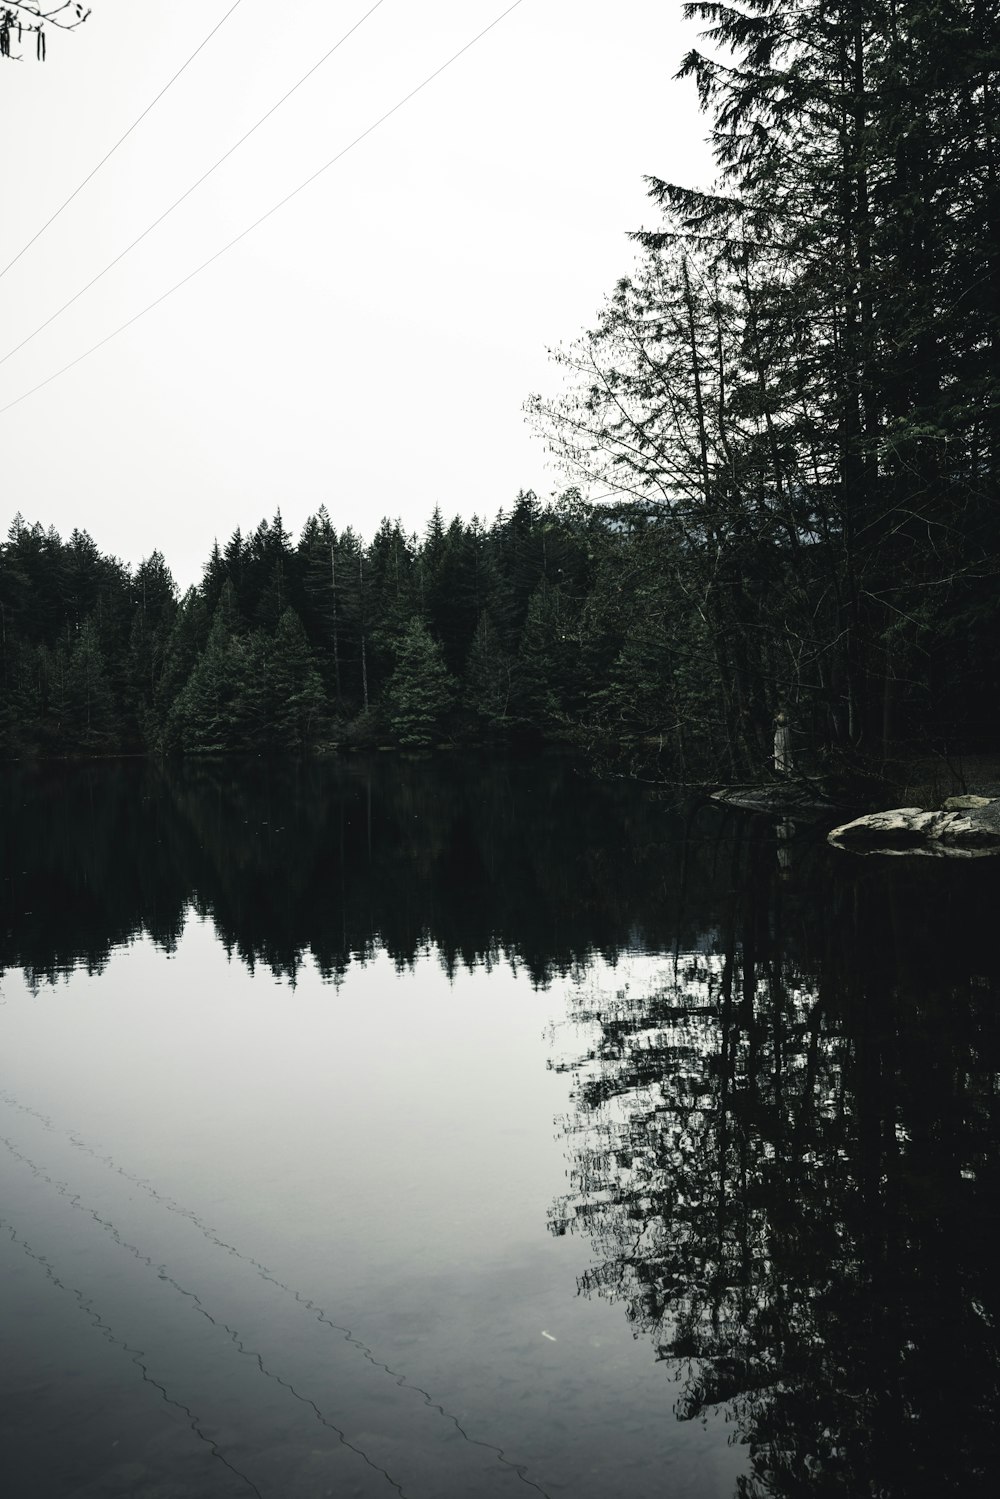 a body of water surrounded by trees and power lines